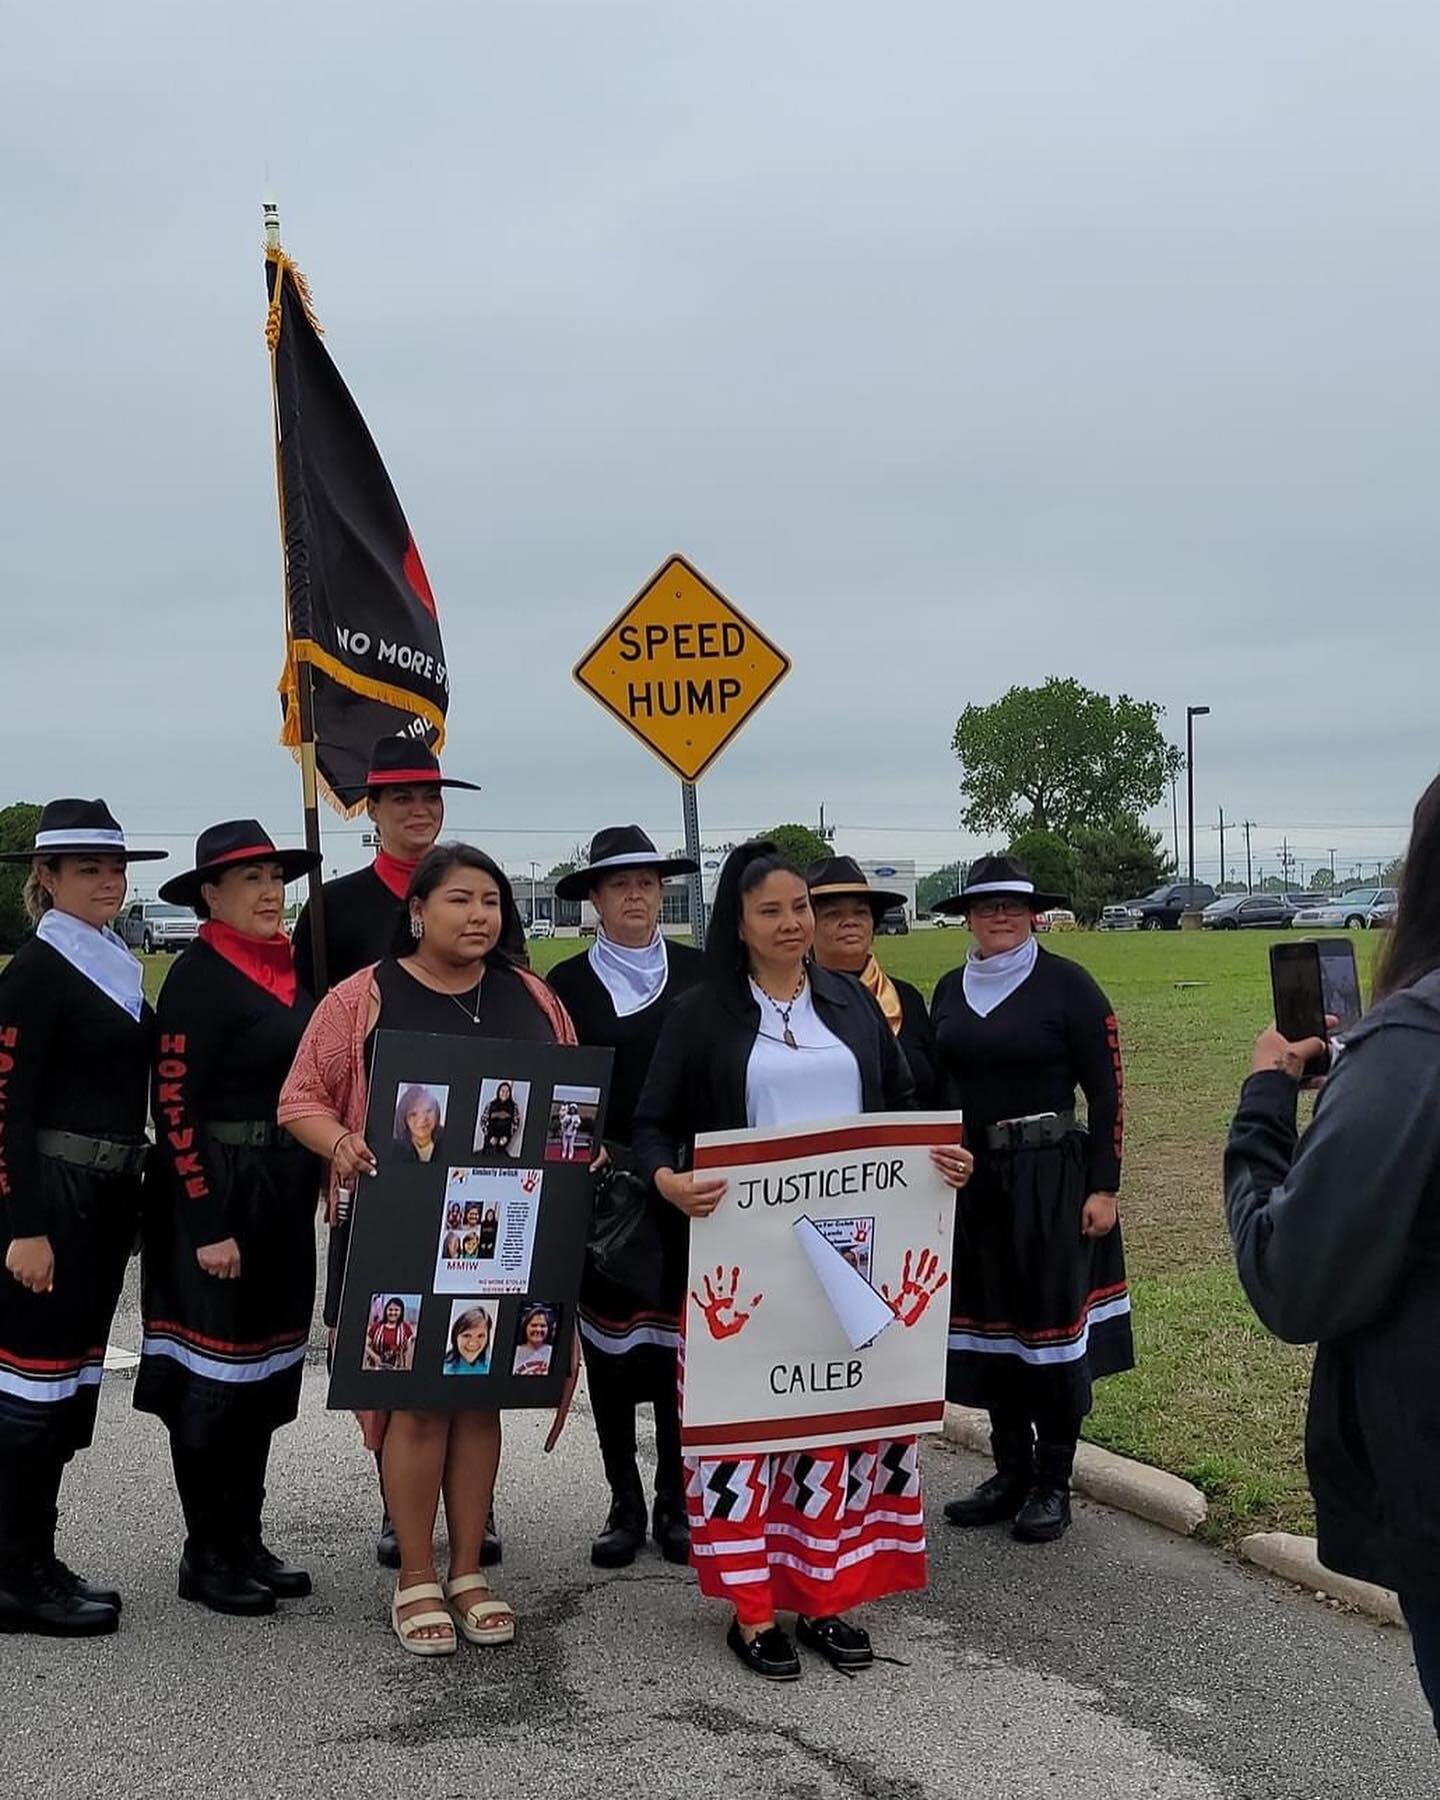 Today and every day the Native Alliance Against Violence stands with the families of Missing and Murdered Indigenous People. We joined @mcn_centerforvictimservices for their MMIP honor walk today to show community support. May 5th is recognized as MM